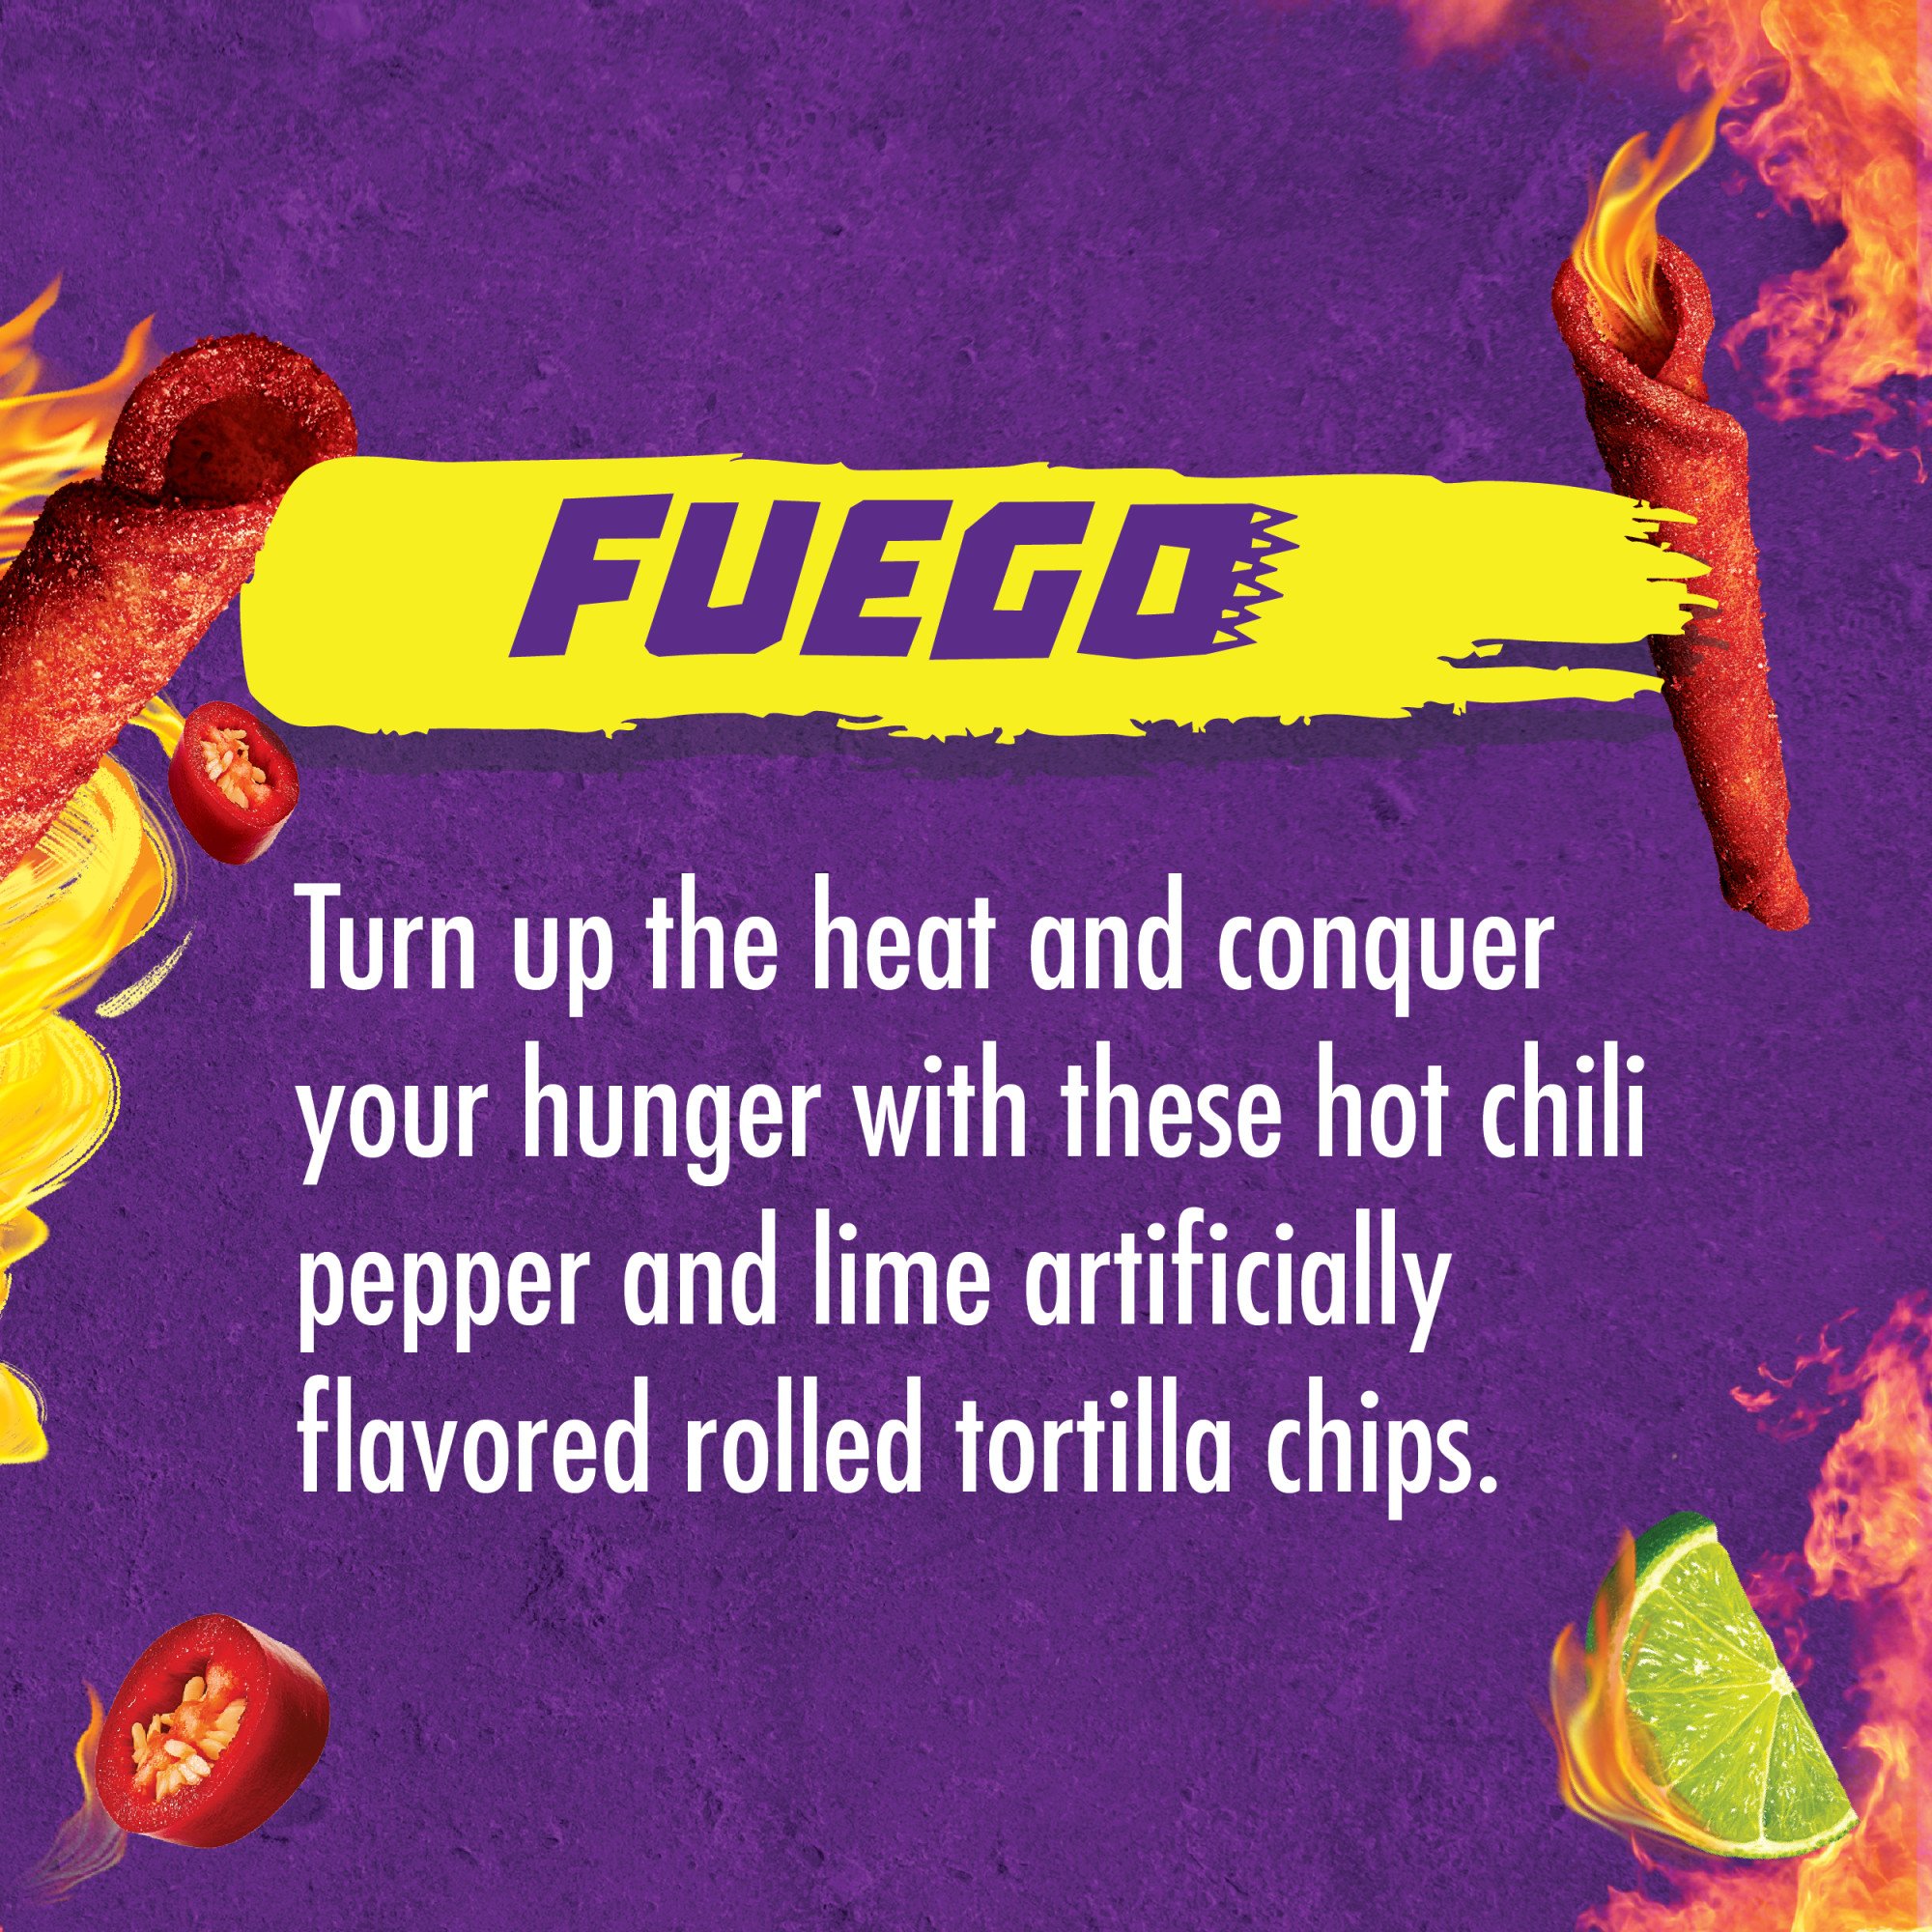 Takis Fuego Hot Chili Pepper & Lime Rolled Tortilla Chips - Shop